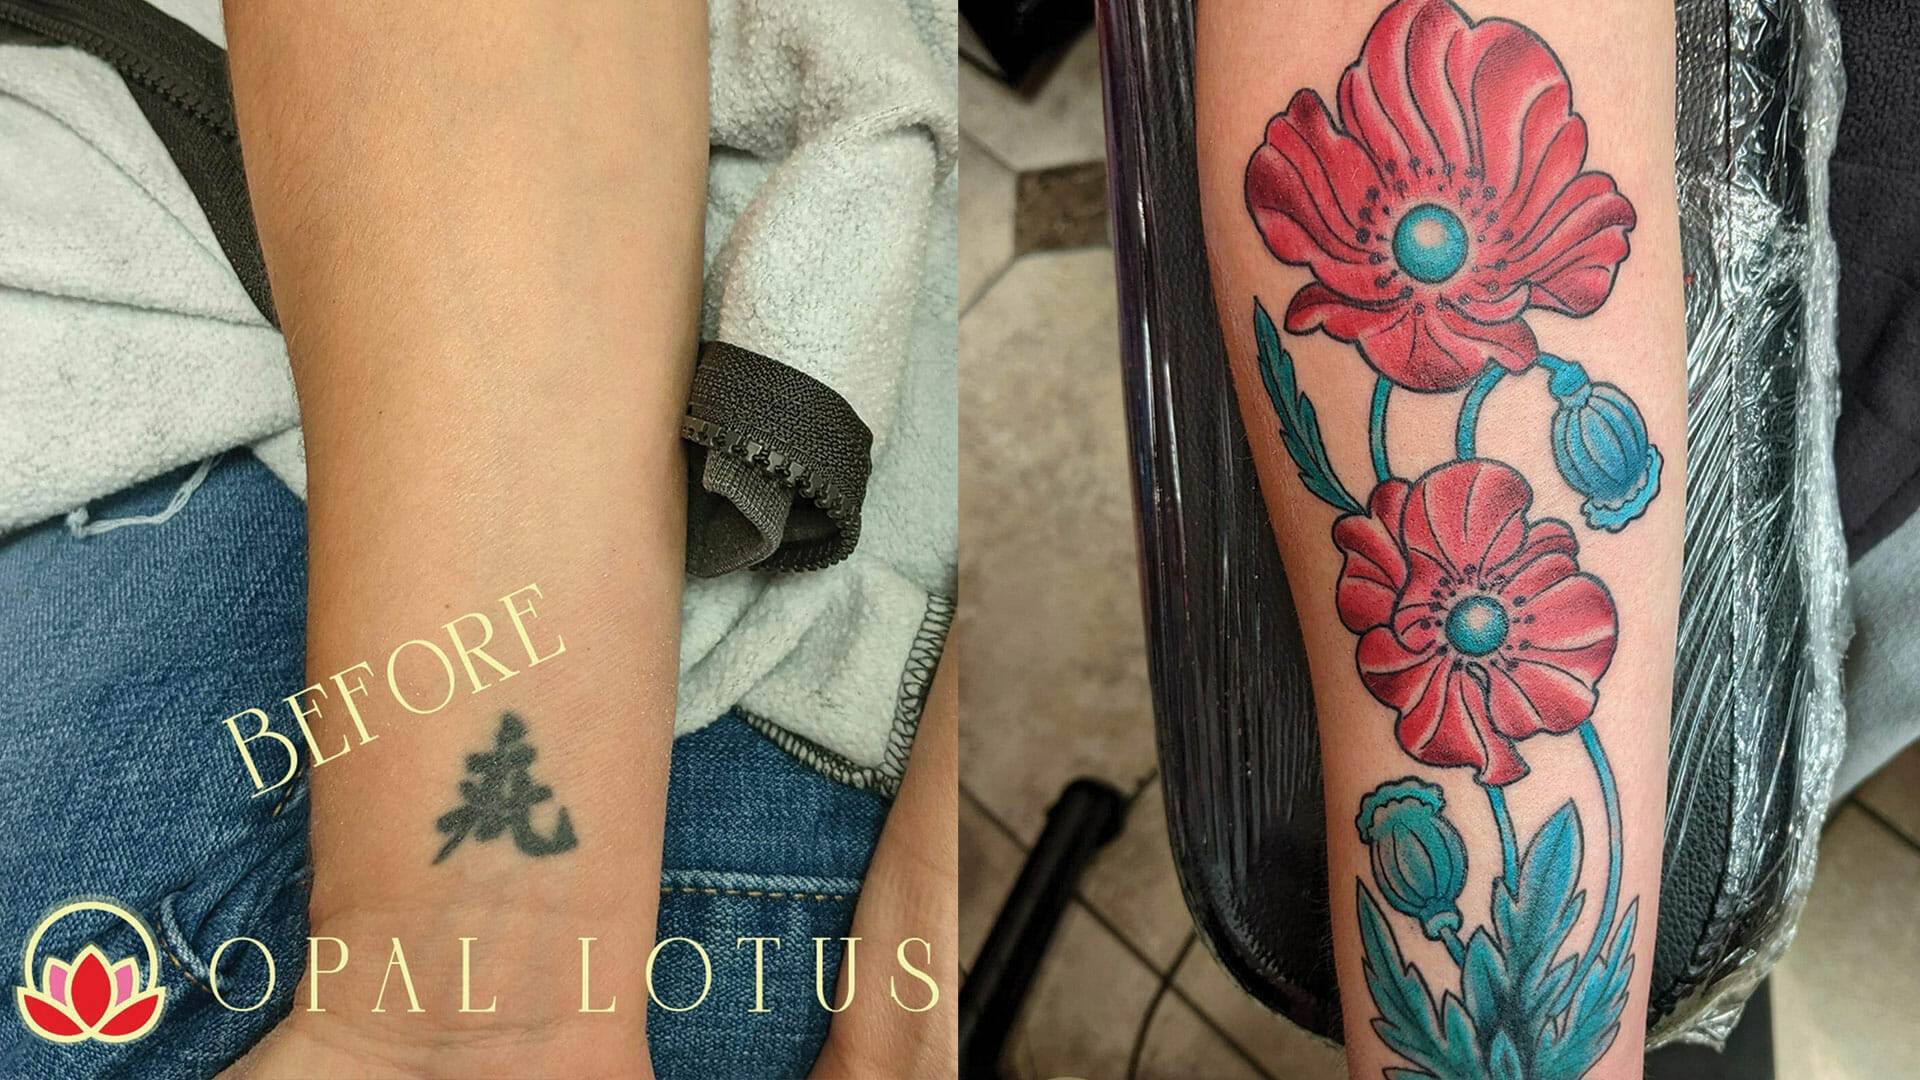 Tattoos have become a surprise hit with midlifers like me – here's why